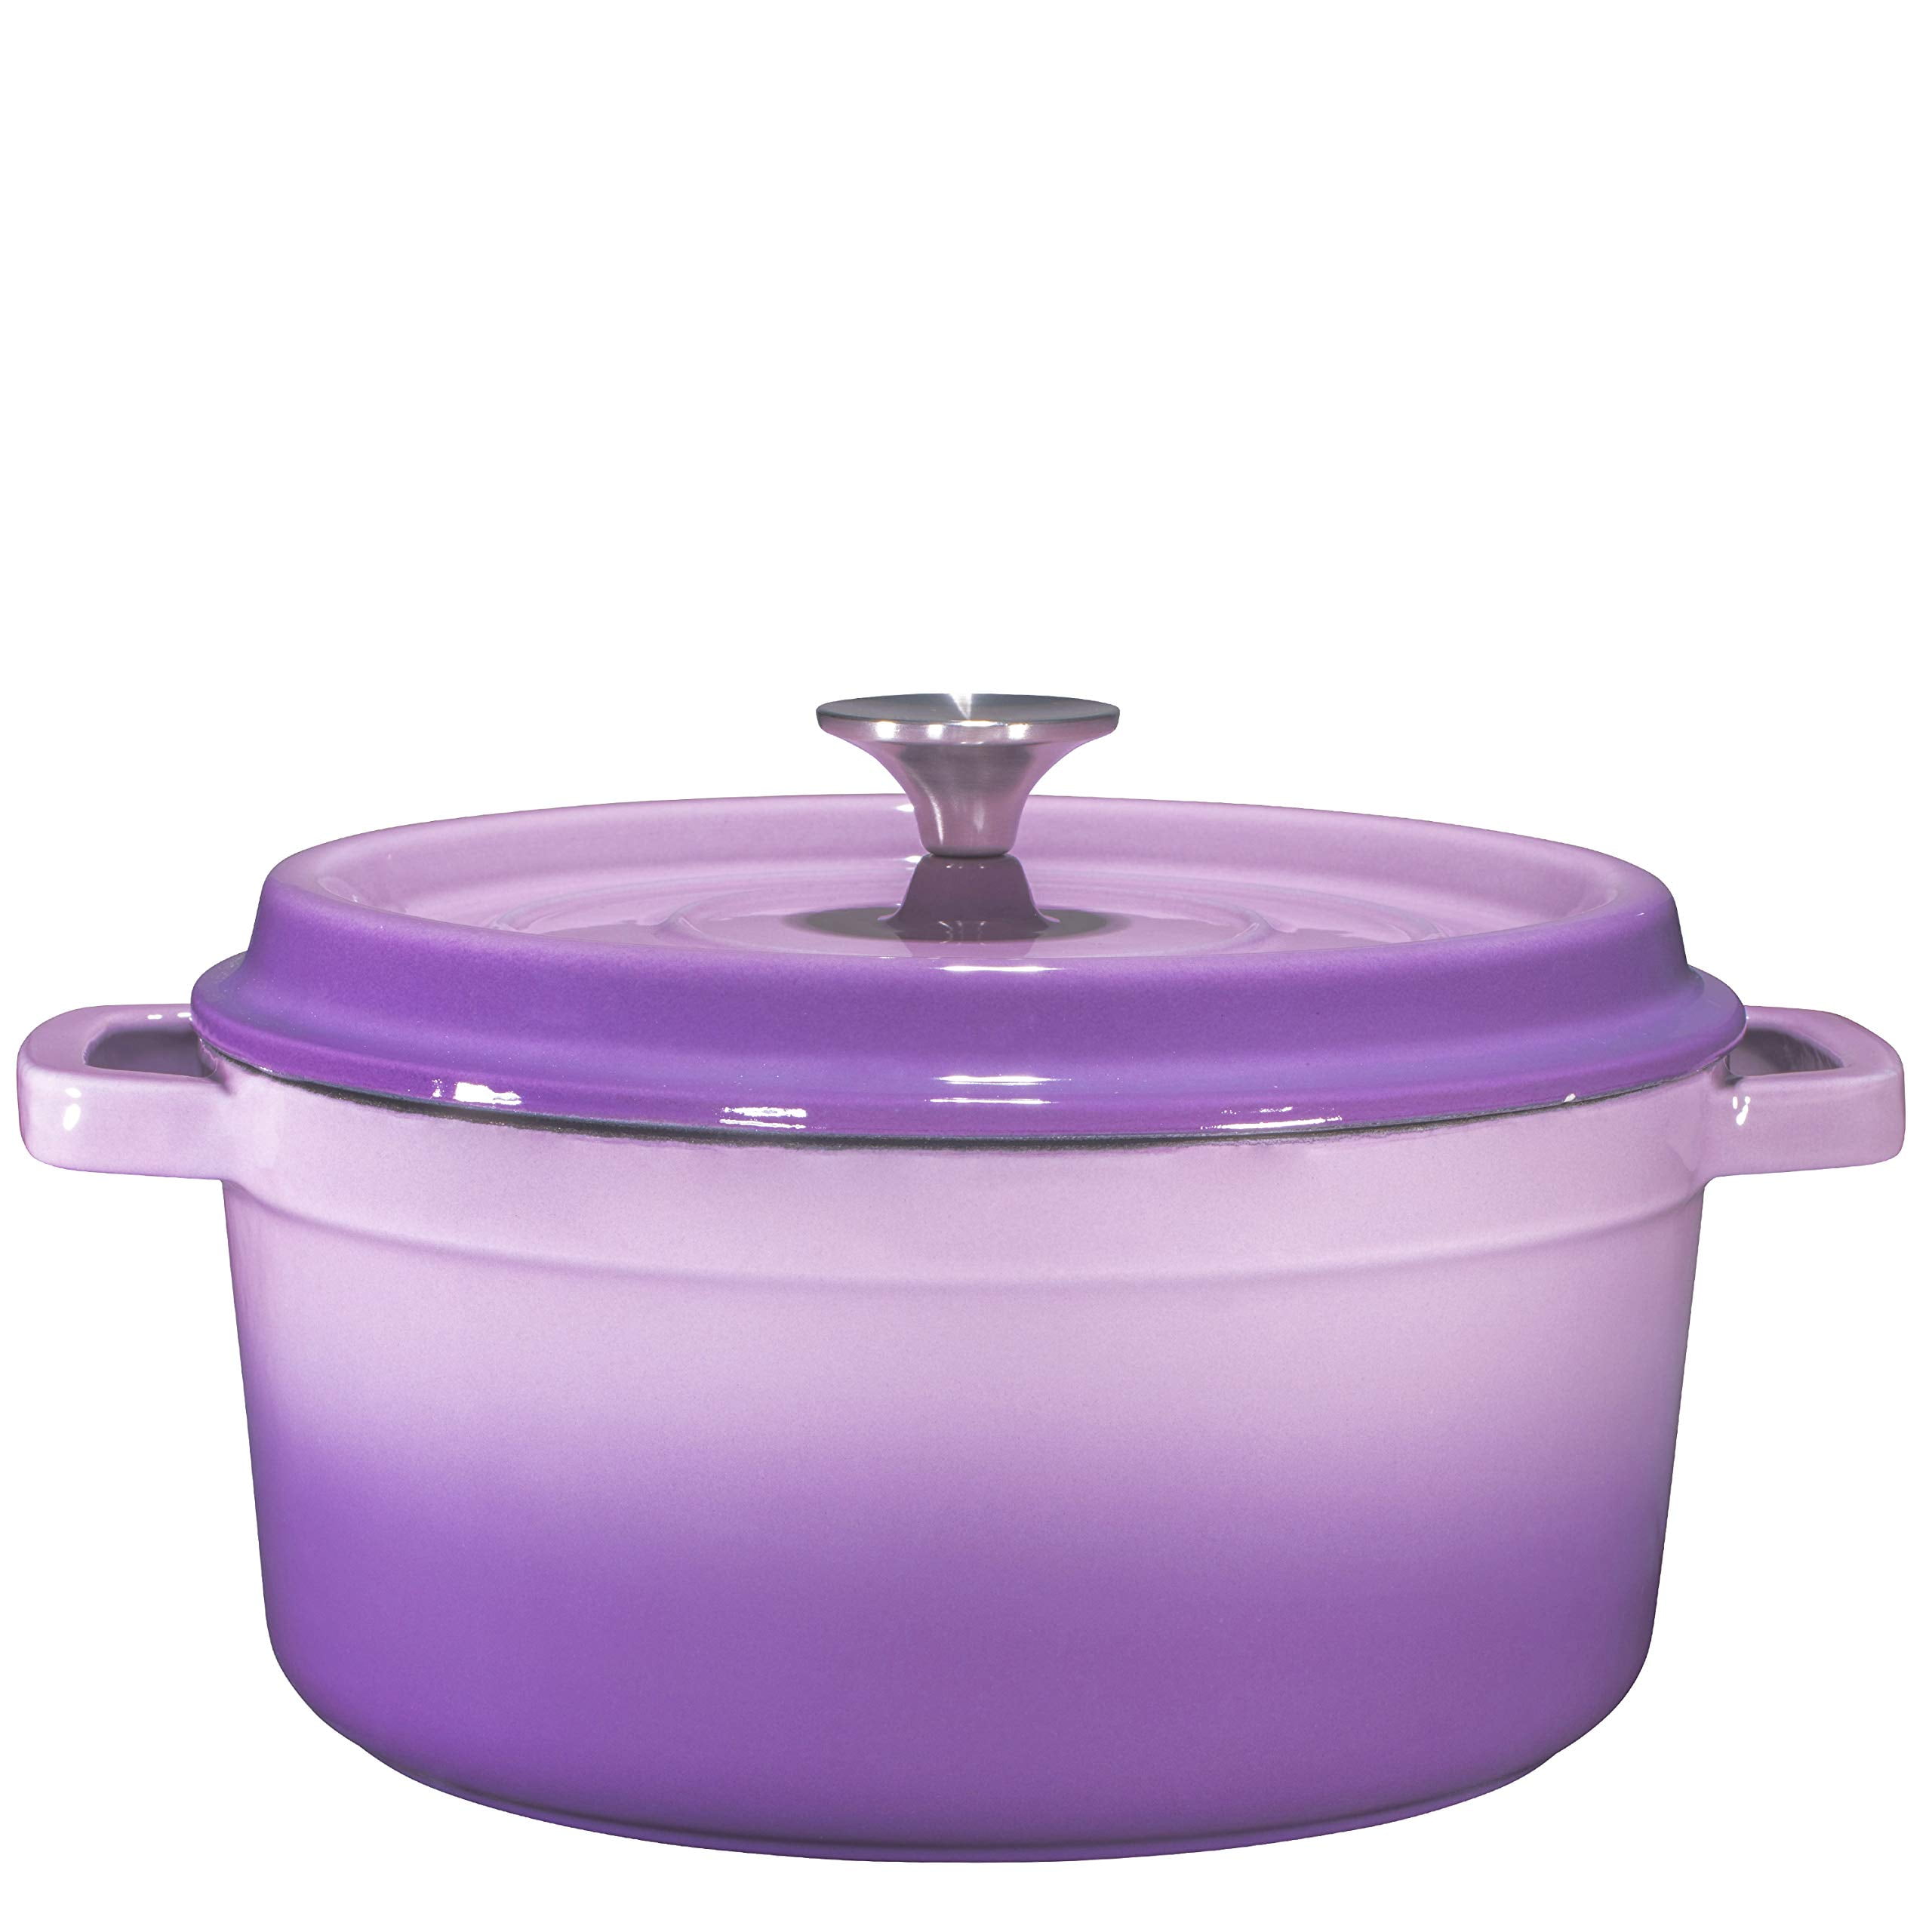 24Qt Dutch Oven Non Stick Heavy Gauge Aluminum Extra Large Casserole Pot  With Glass Lid Fits 6 Gallons For Healthy Cooking 